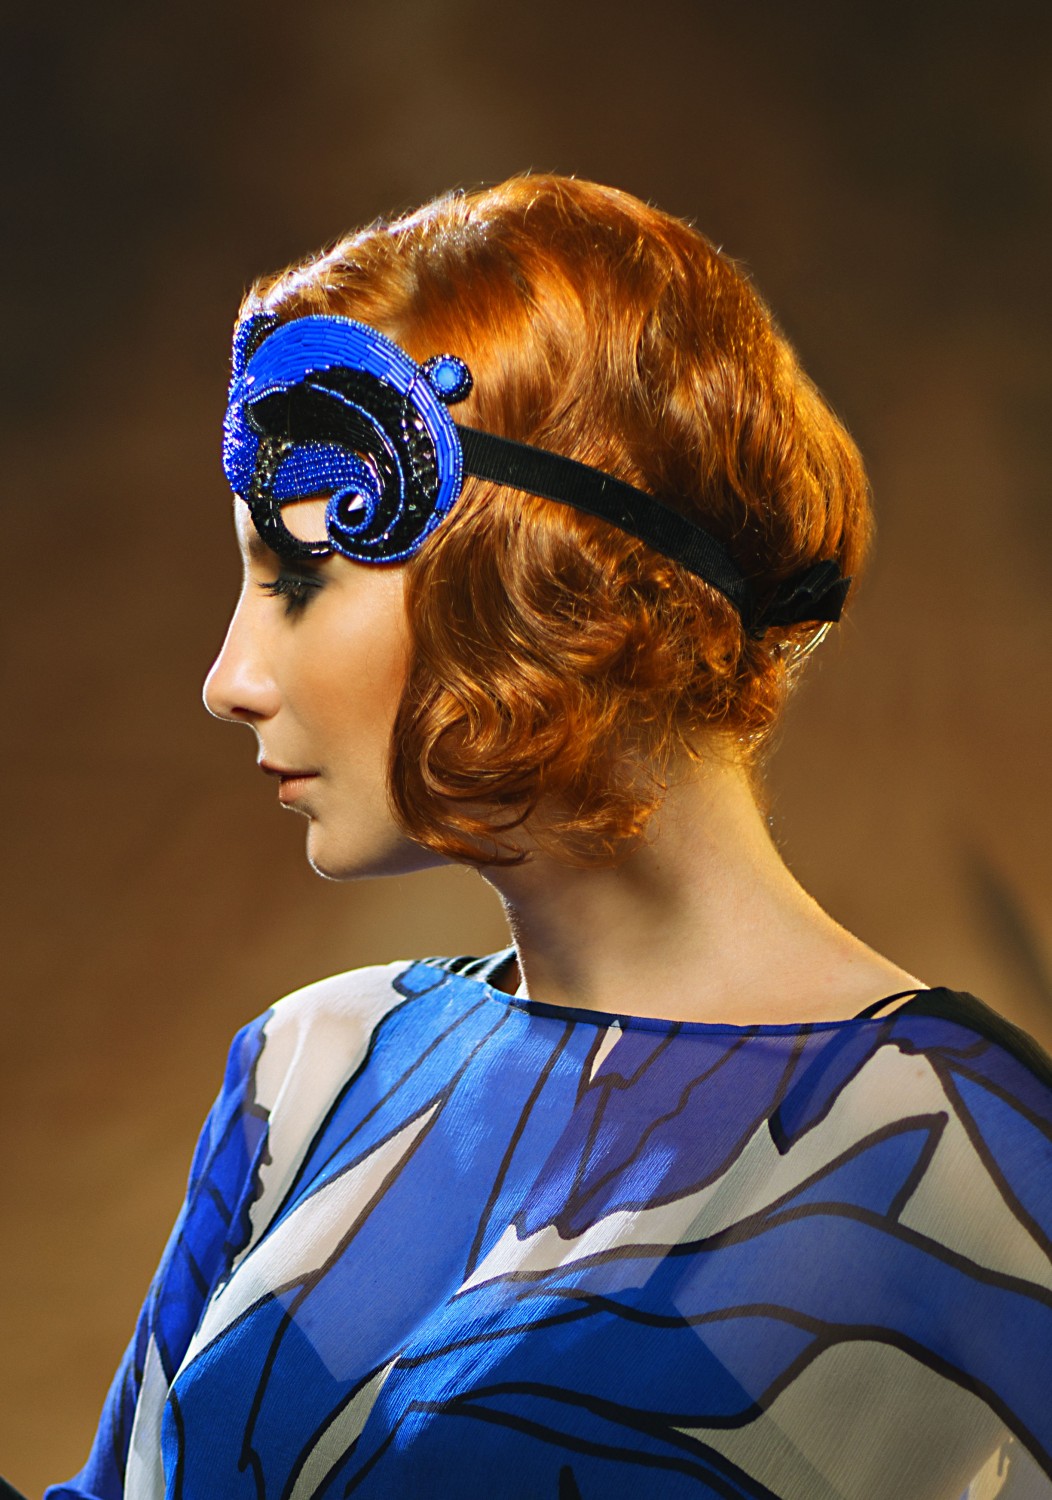 Marion Dazzling Sapphire Blue and Black Headpiece